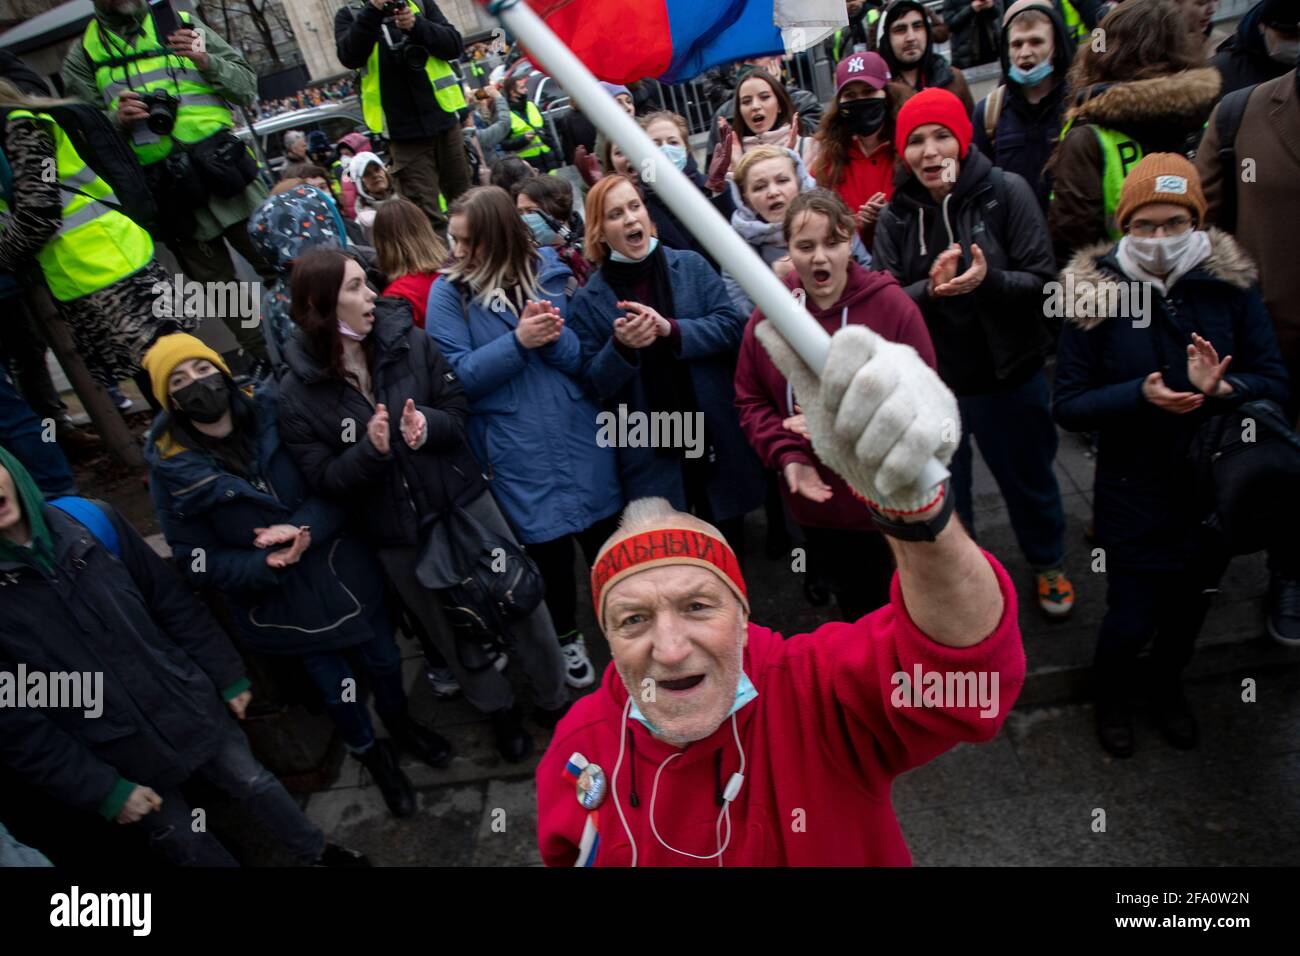 Moscow, Russia. 21st of April, 2021 An opposition supporter waves a Russian national flag as he walks in a street during a rally in support of jailed Kremlin critic Alexei Navalny, in central Moscow, Russia. Jailed Kremlin critic Alexei Navalny's team called for demonstrations in more than 100 cities, after the opposition figure's doctors said his health was failing following three weeks on hunger strike. Stock Photo